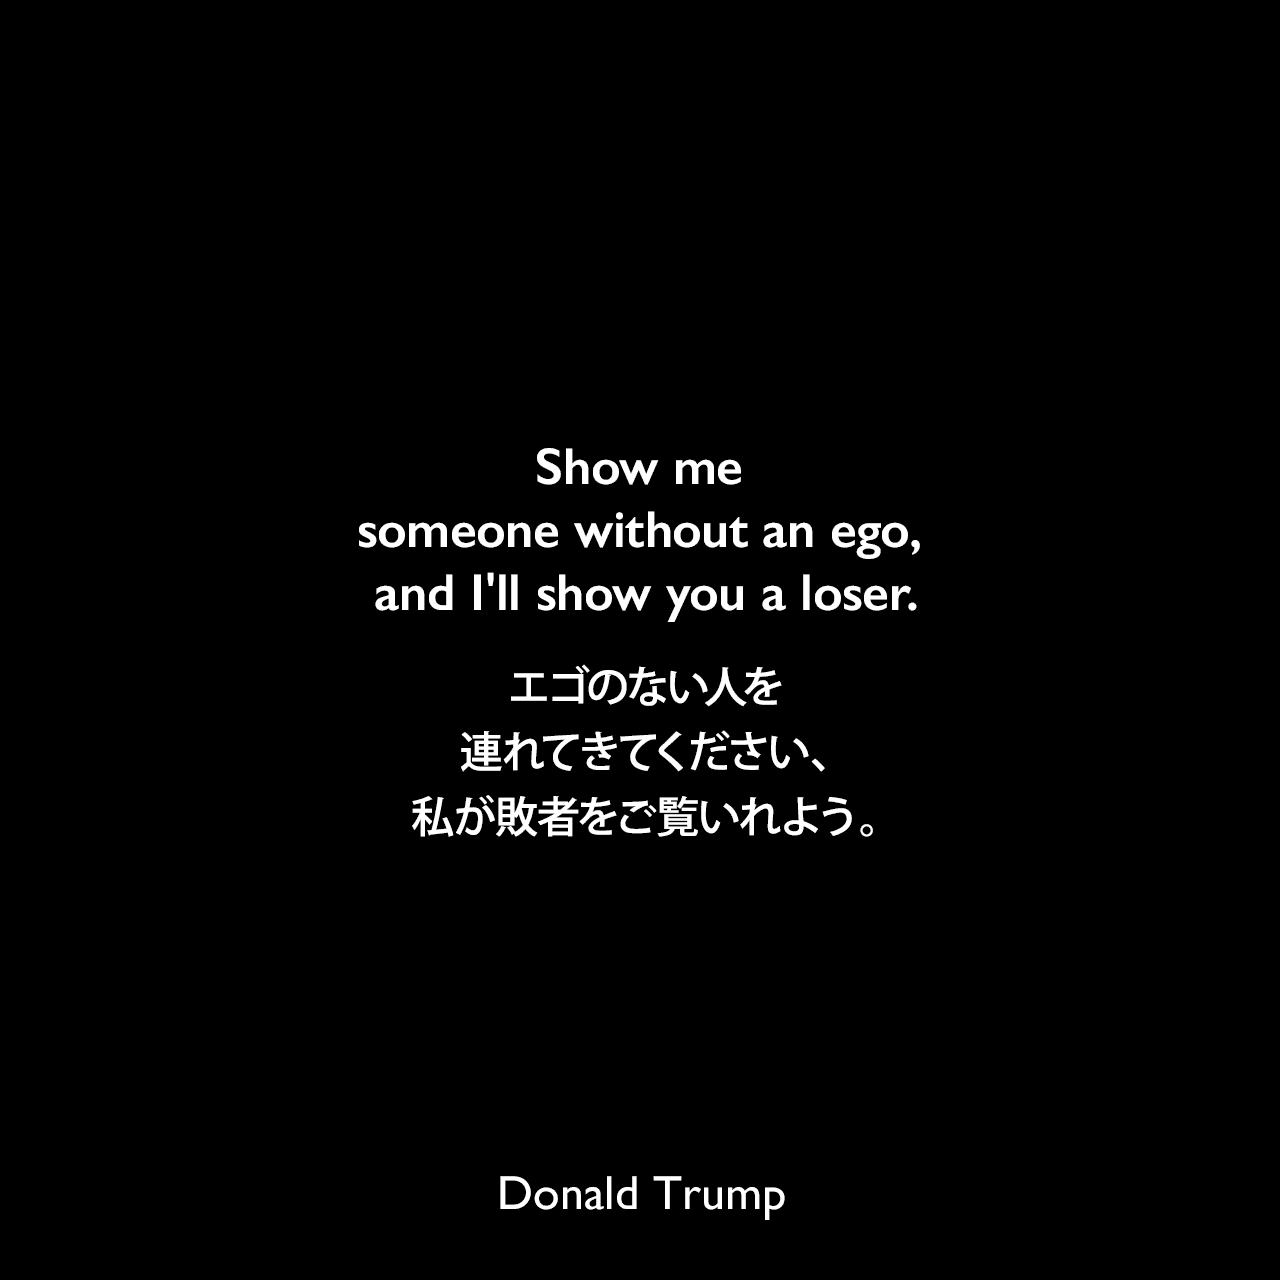 Show me someone without an ego, and I'll show you a loser.エゴのない人を連れてきてください、私が敗者をご覧いれよう。Donald Trump